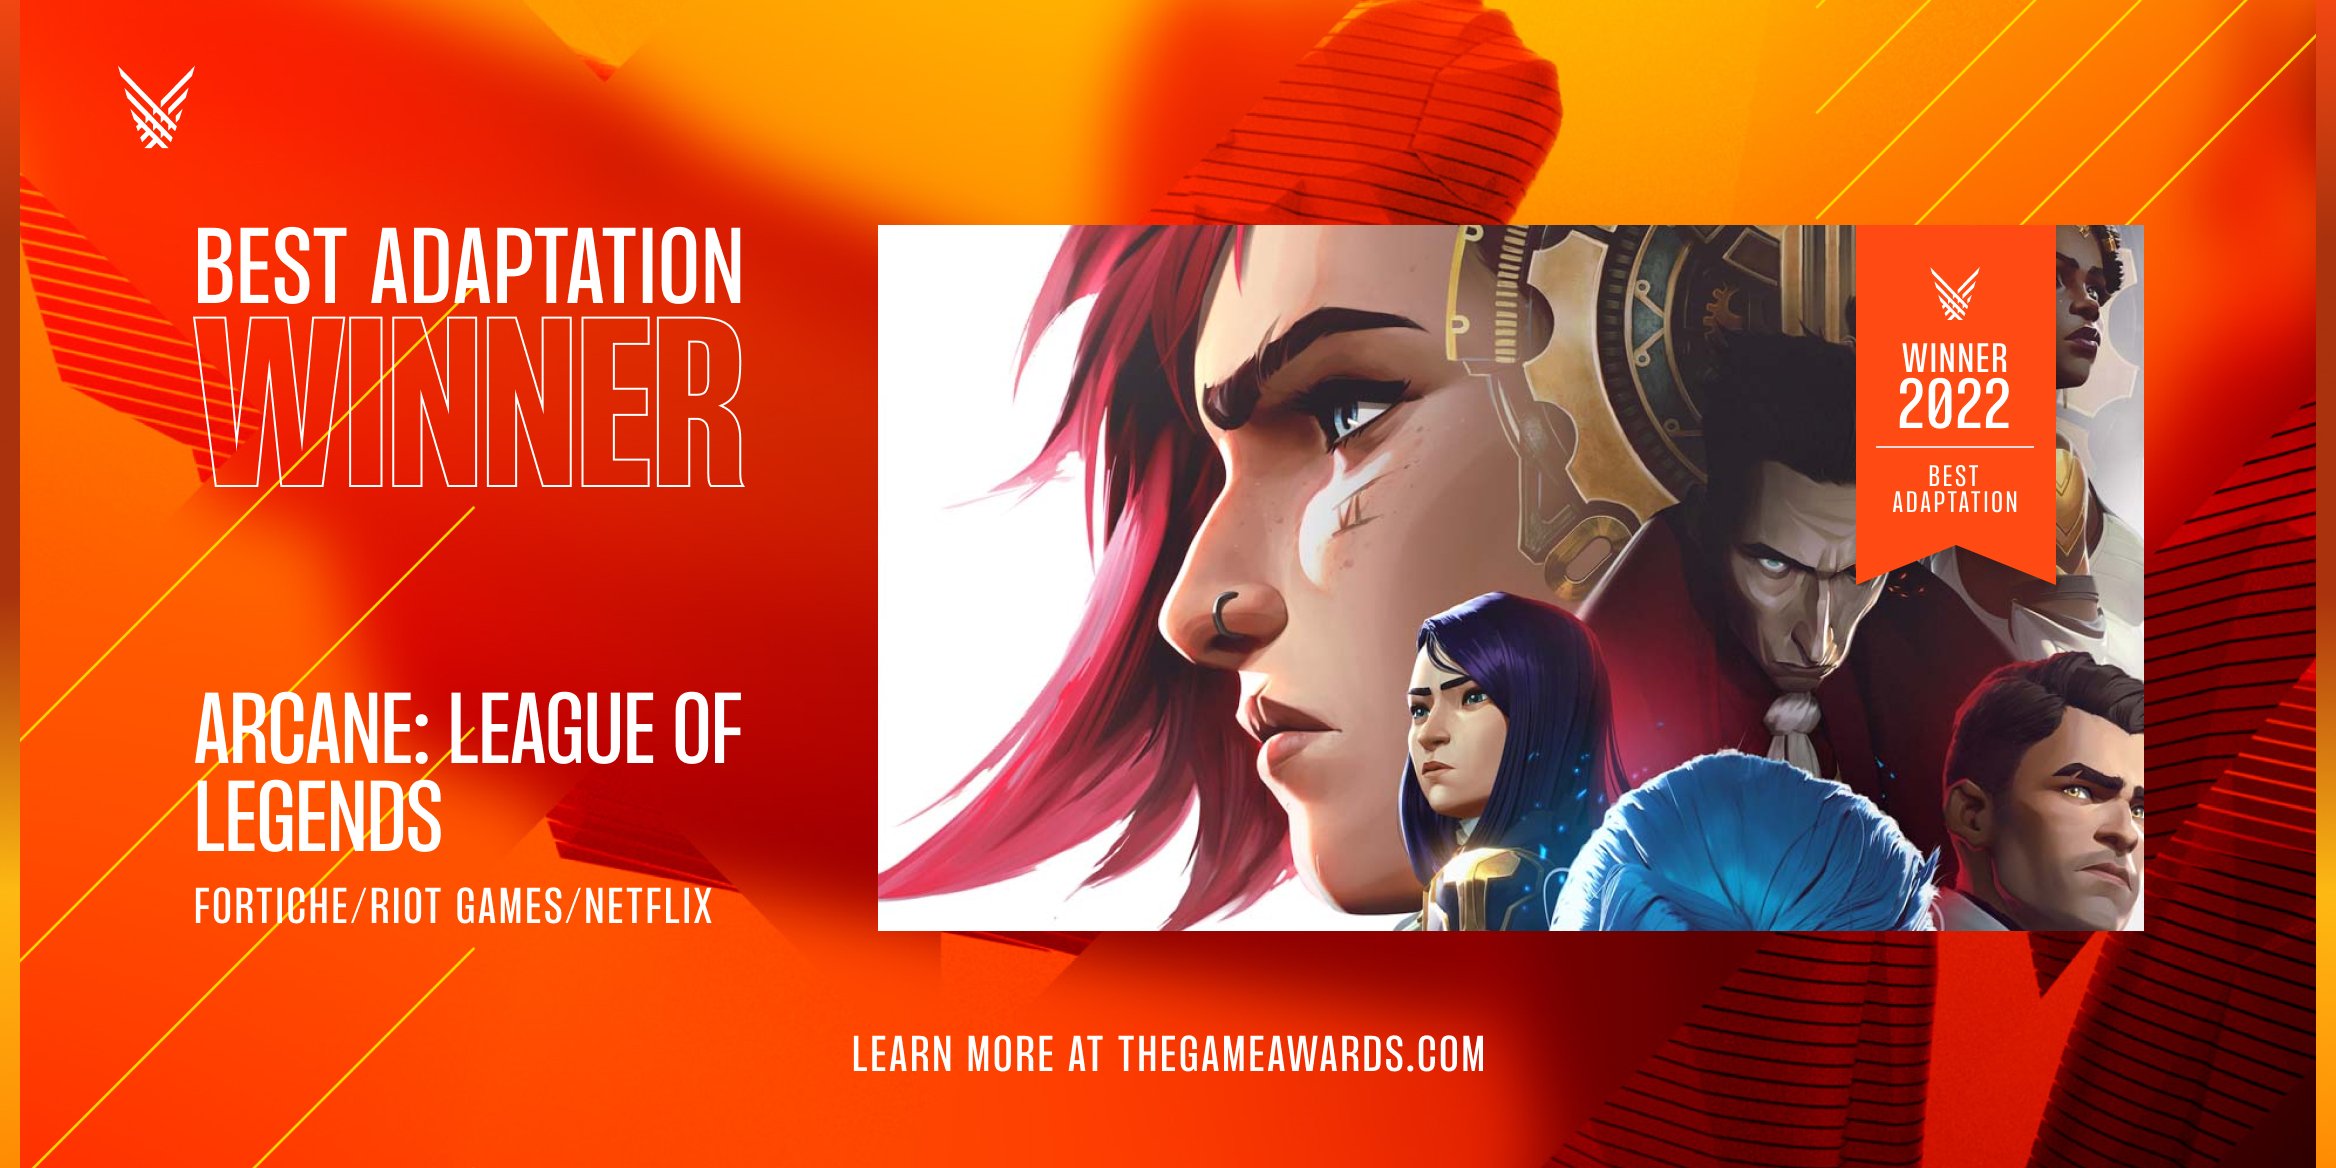 Winners & Best Announcements From The Game Awards 2020 – The